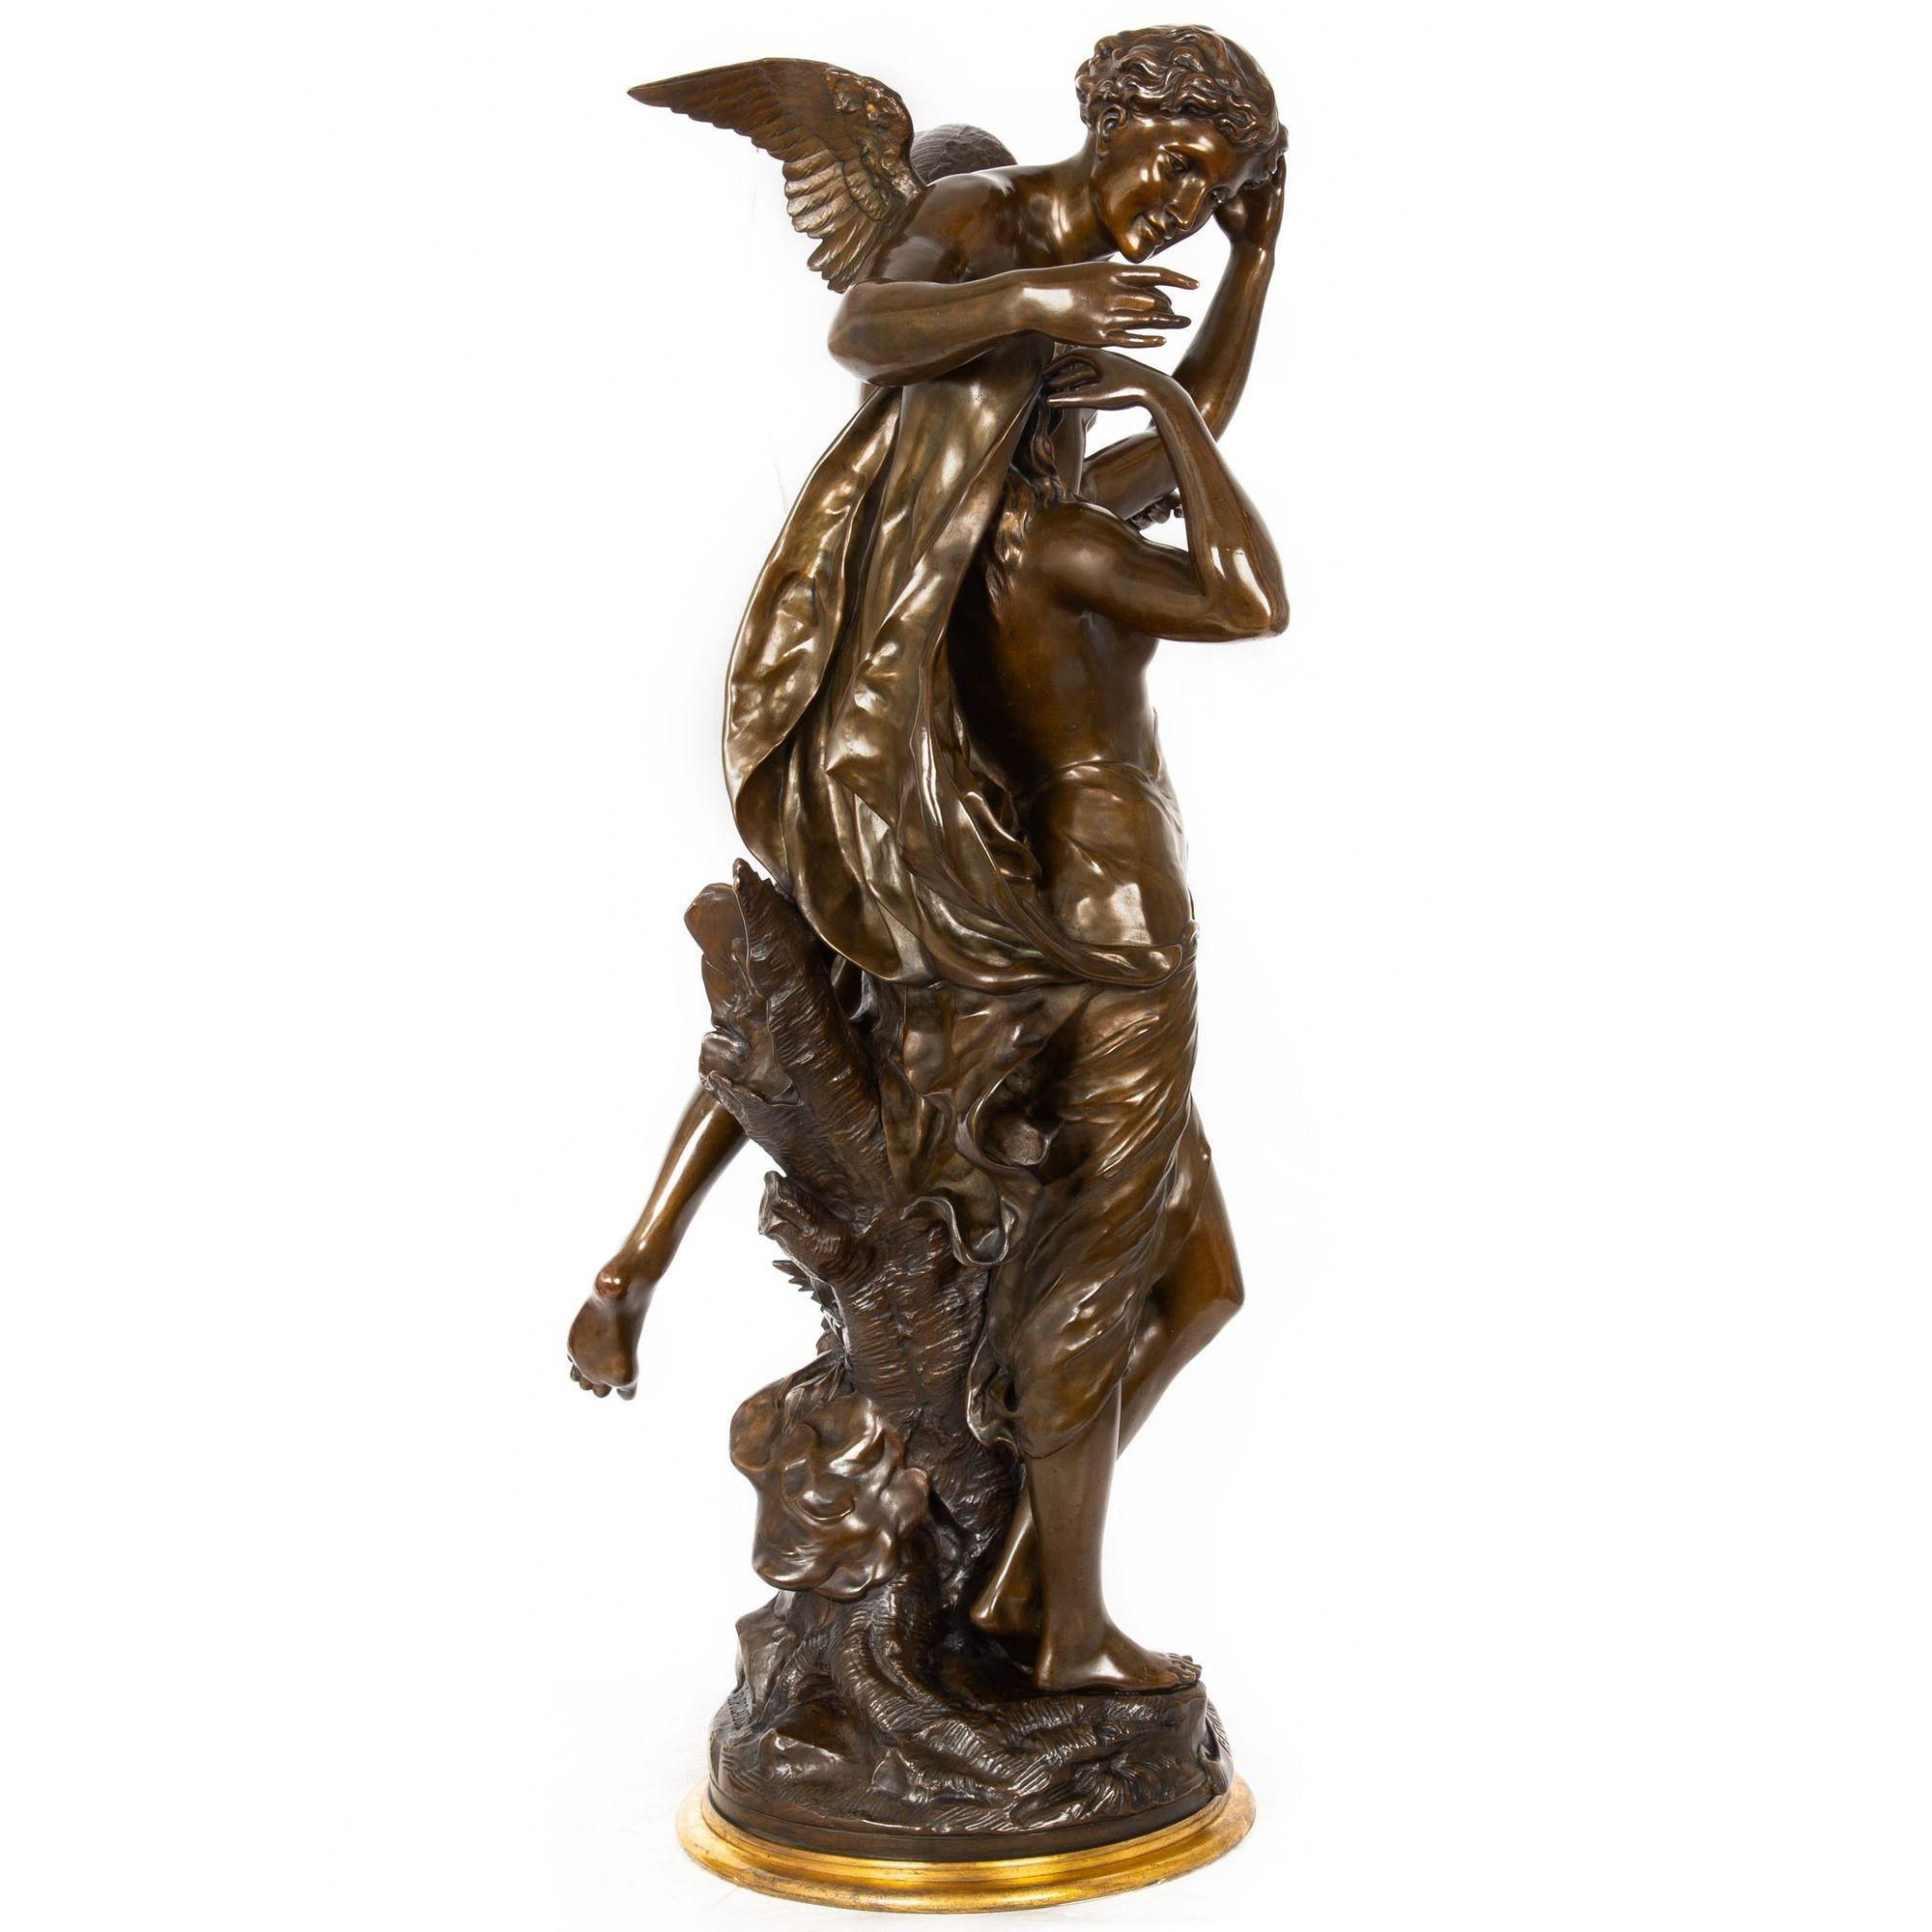 Romantic French Antique Bronze Sculpture “Awakening of Nature” by Emile Picault For Sale